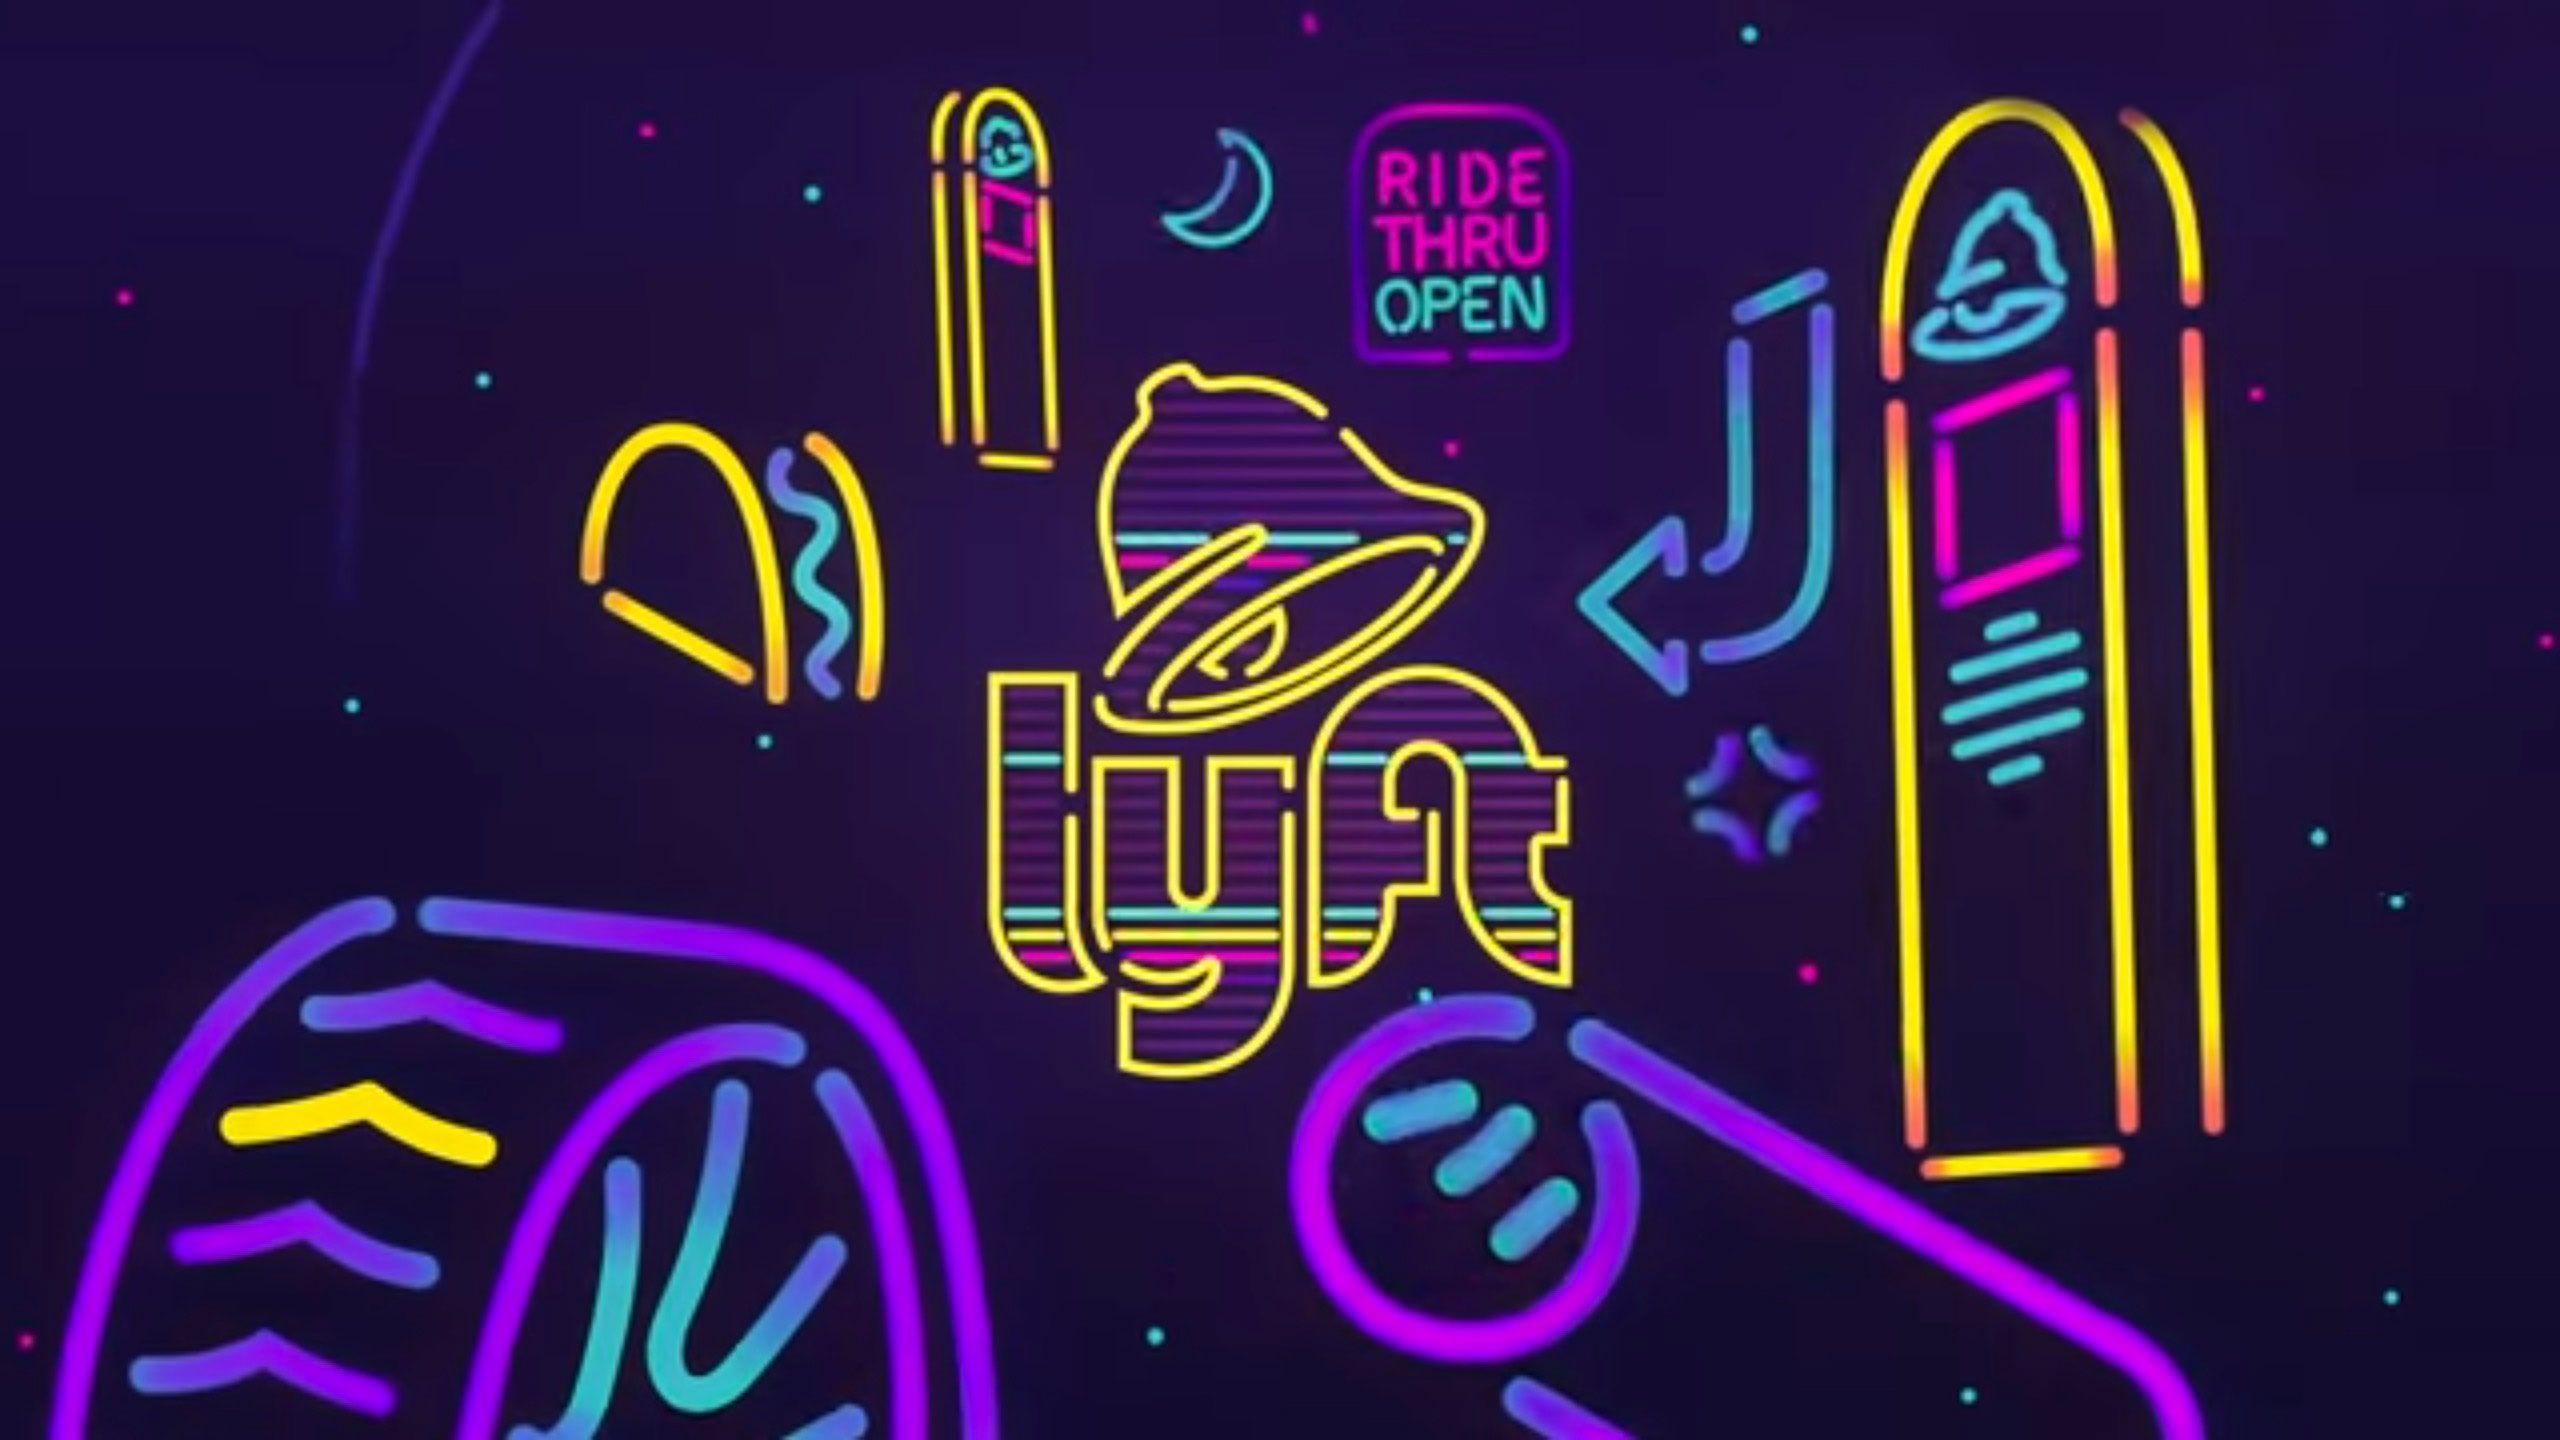 Lyft Brings Passengers to Taco Bell With New Taco Mode